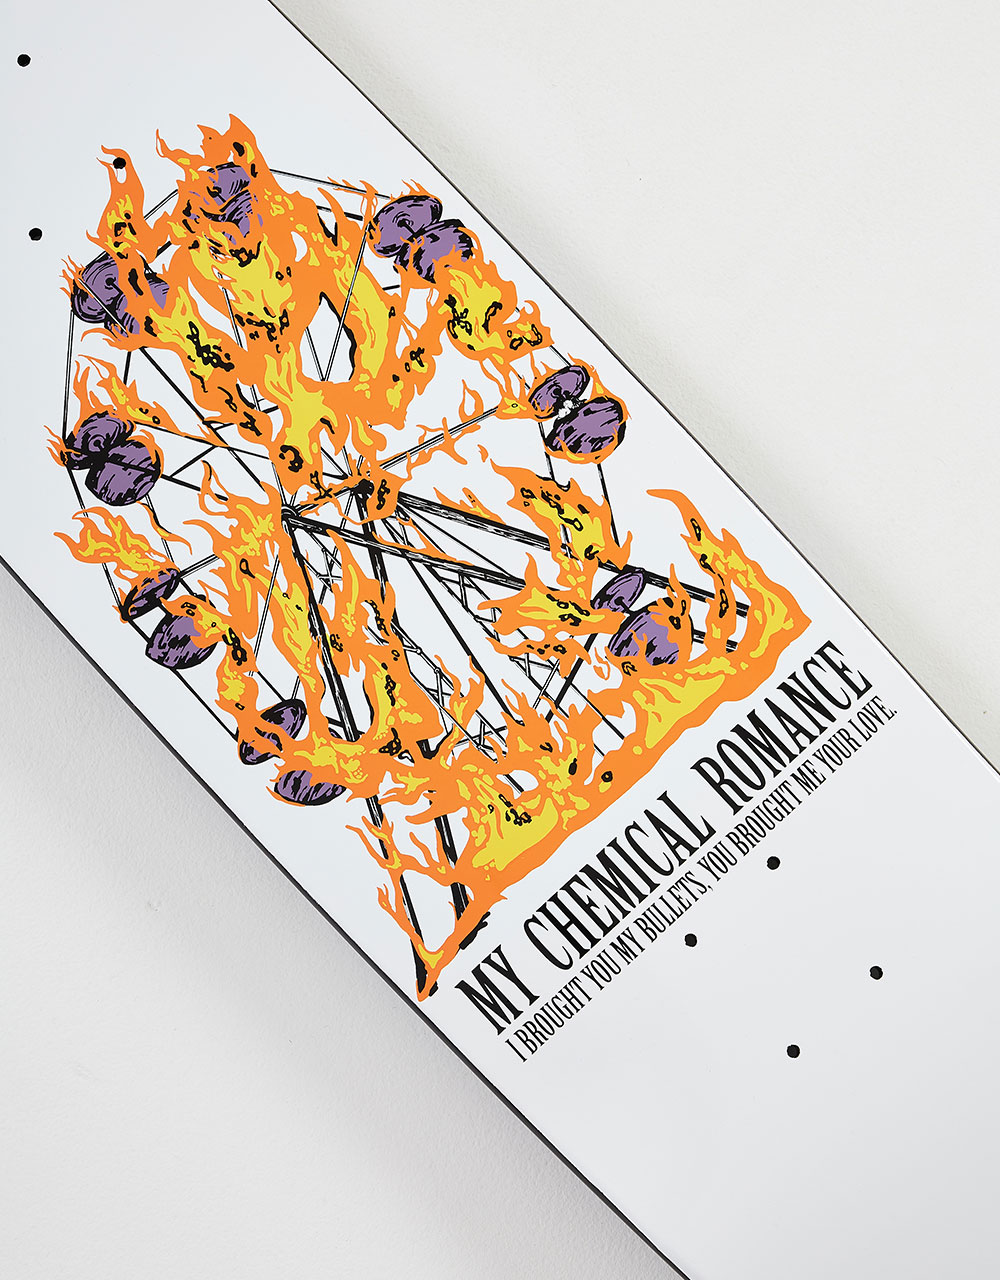 Welcome x My Chemical Romance I Brought You My Bullets on Atheme Skateboard Deck - 8.8"